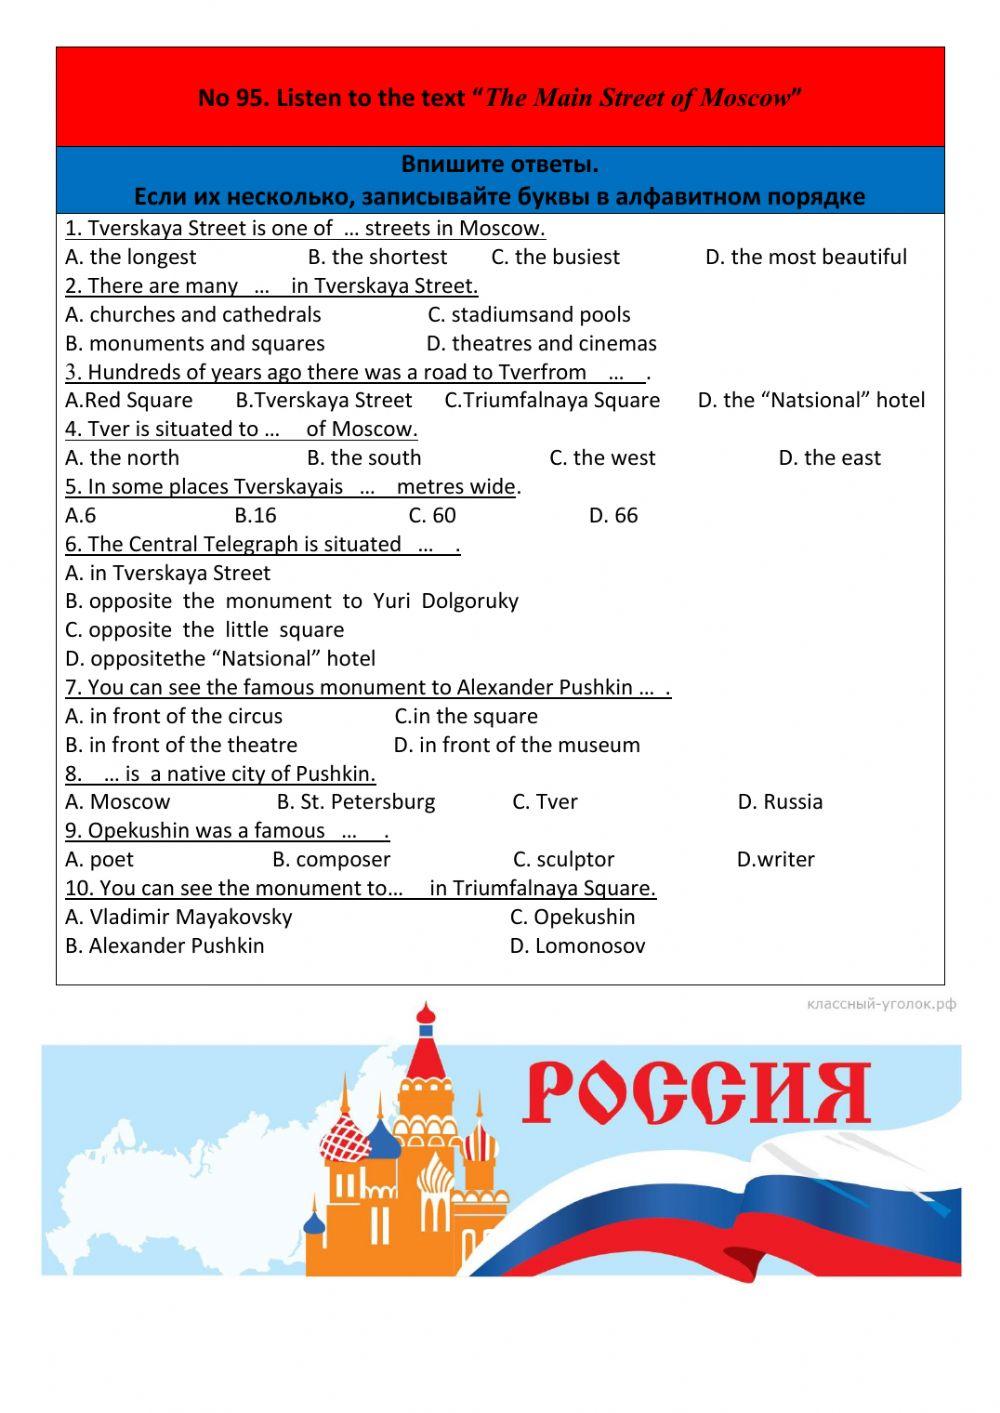 Form 4. Listening №95 “The Main Street of Moscow”